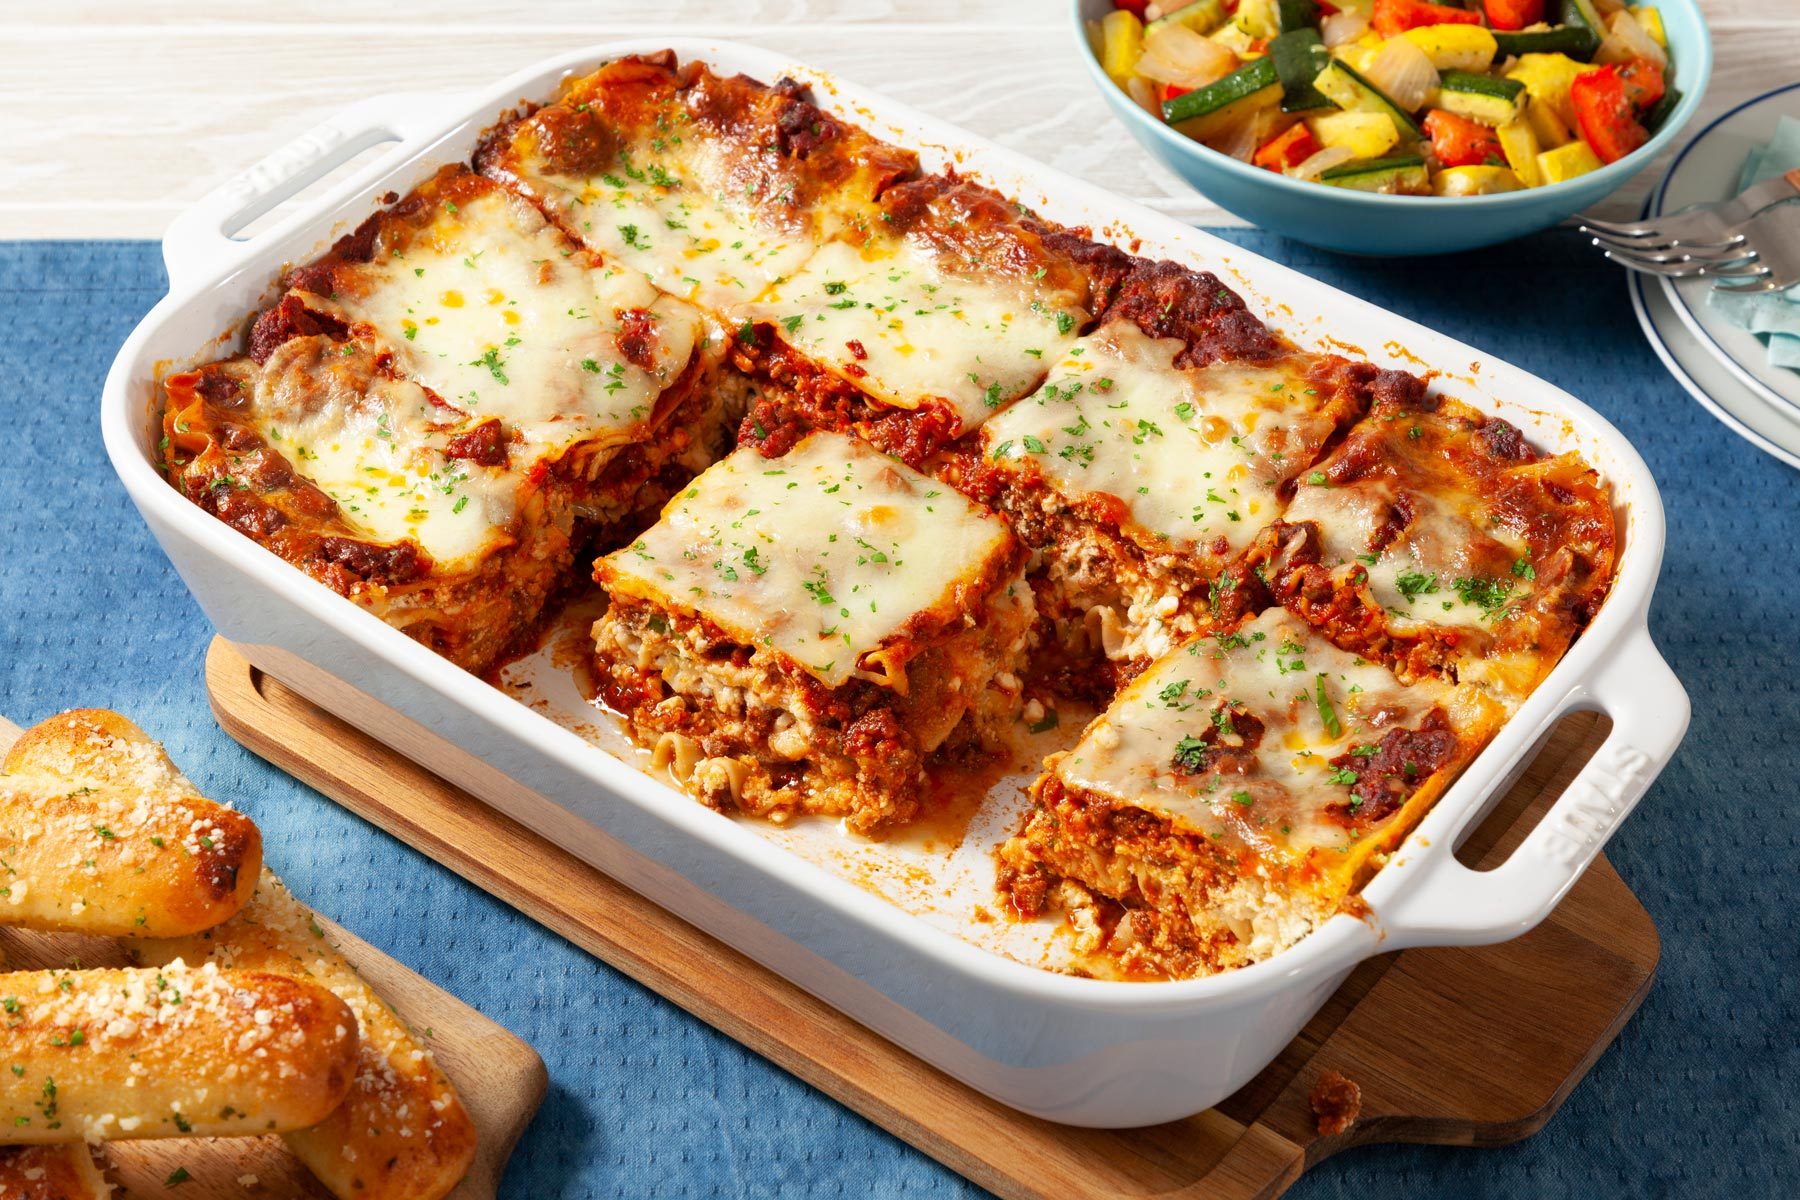 Makeover Traditional Lasagna Recipe: How to Make It